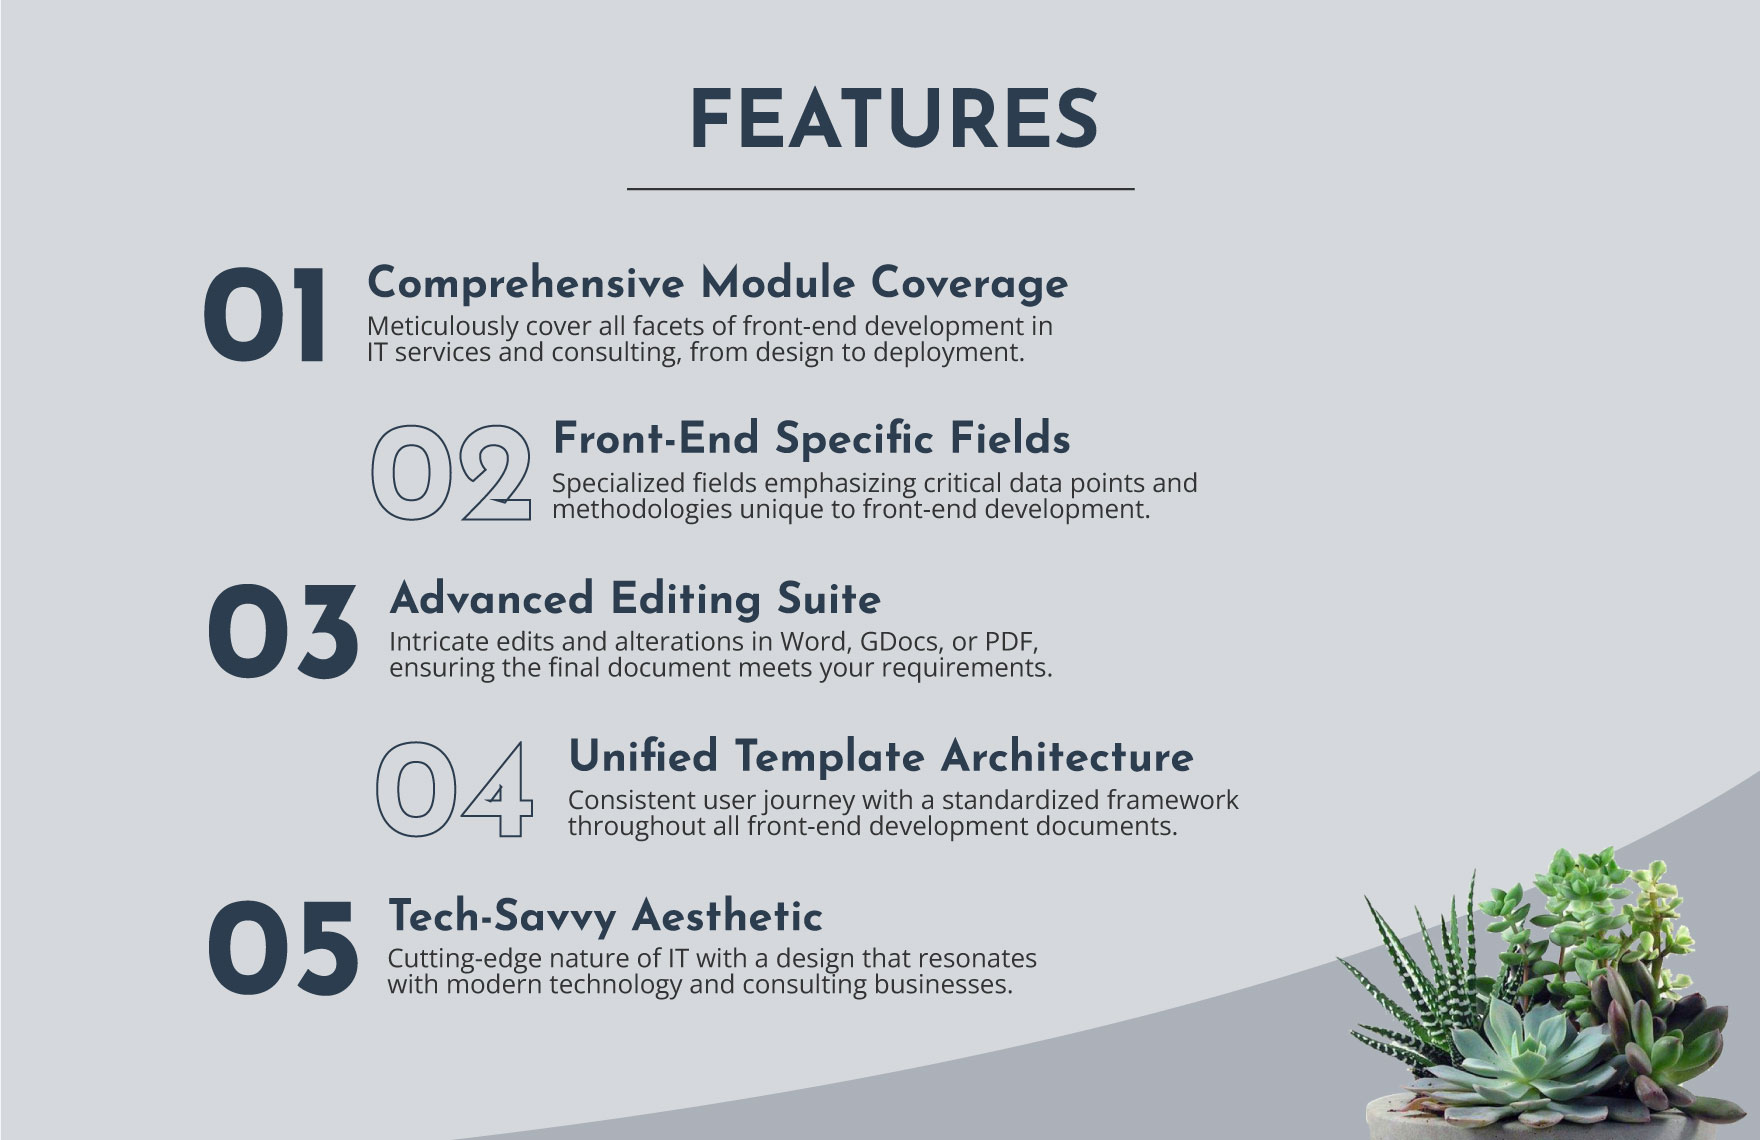 IT Front-End Style Guide Template